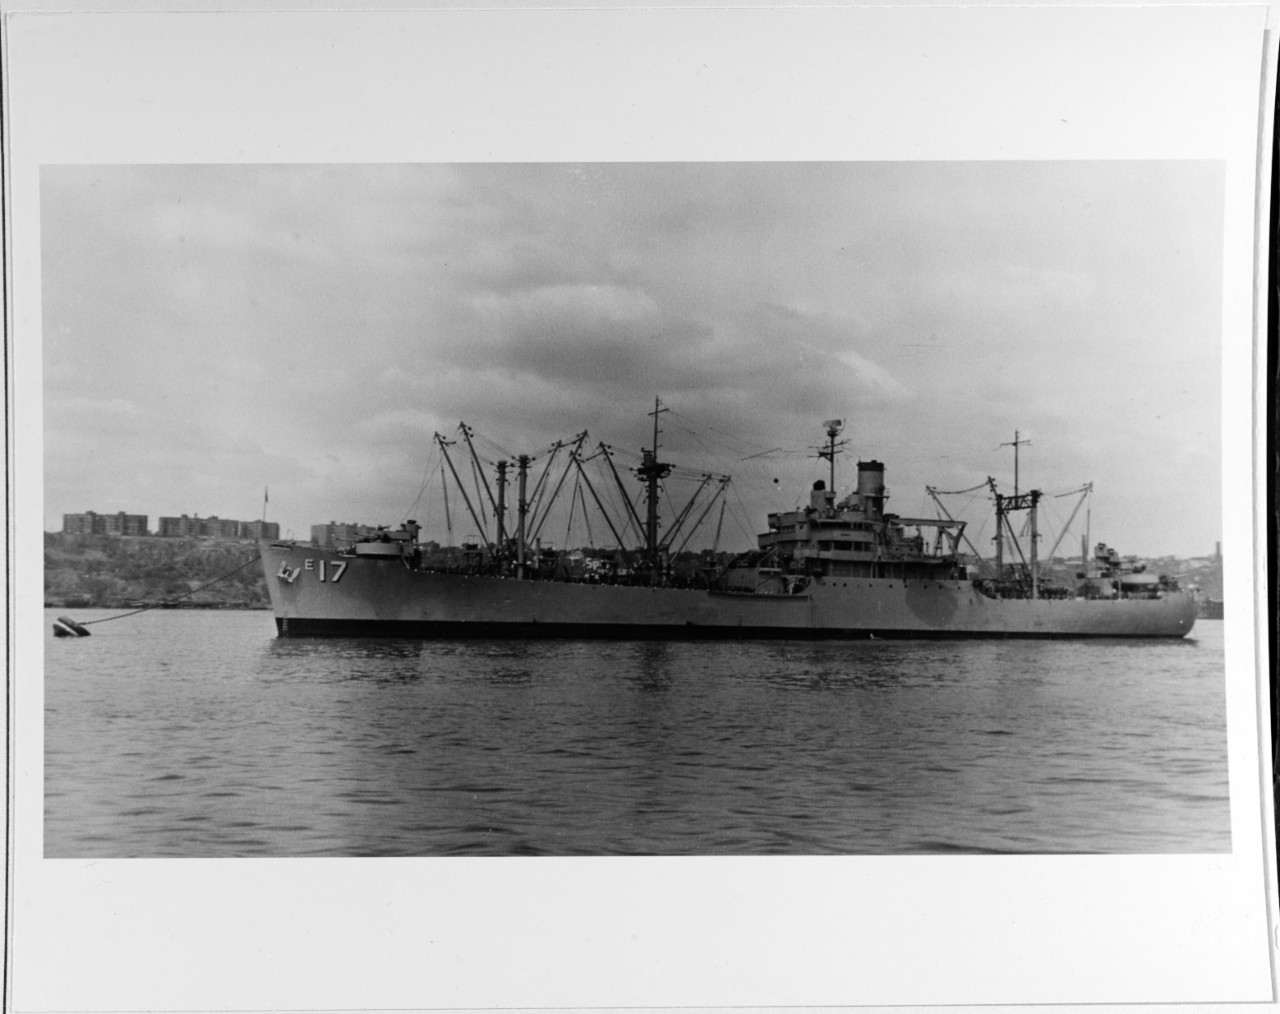 USS GREAT SITKIN (AE-17).